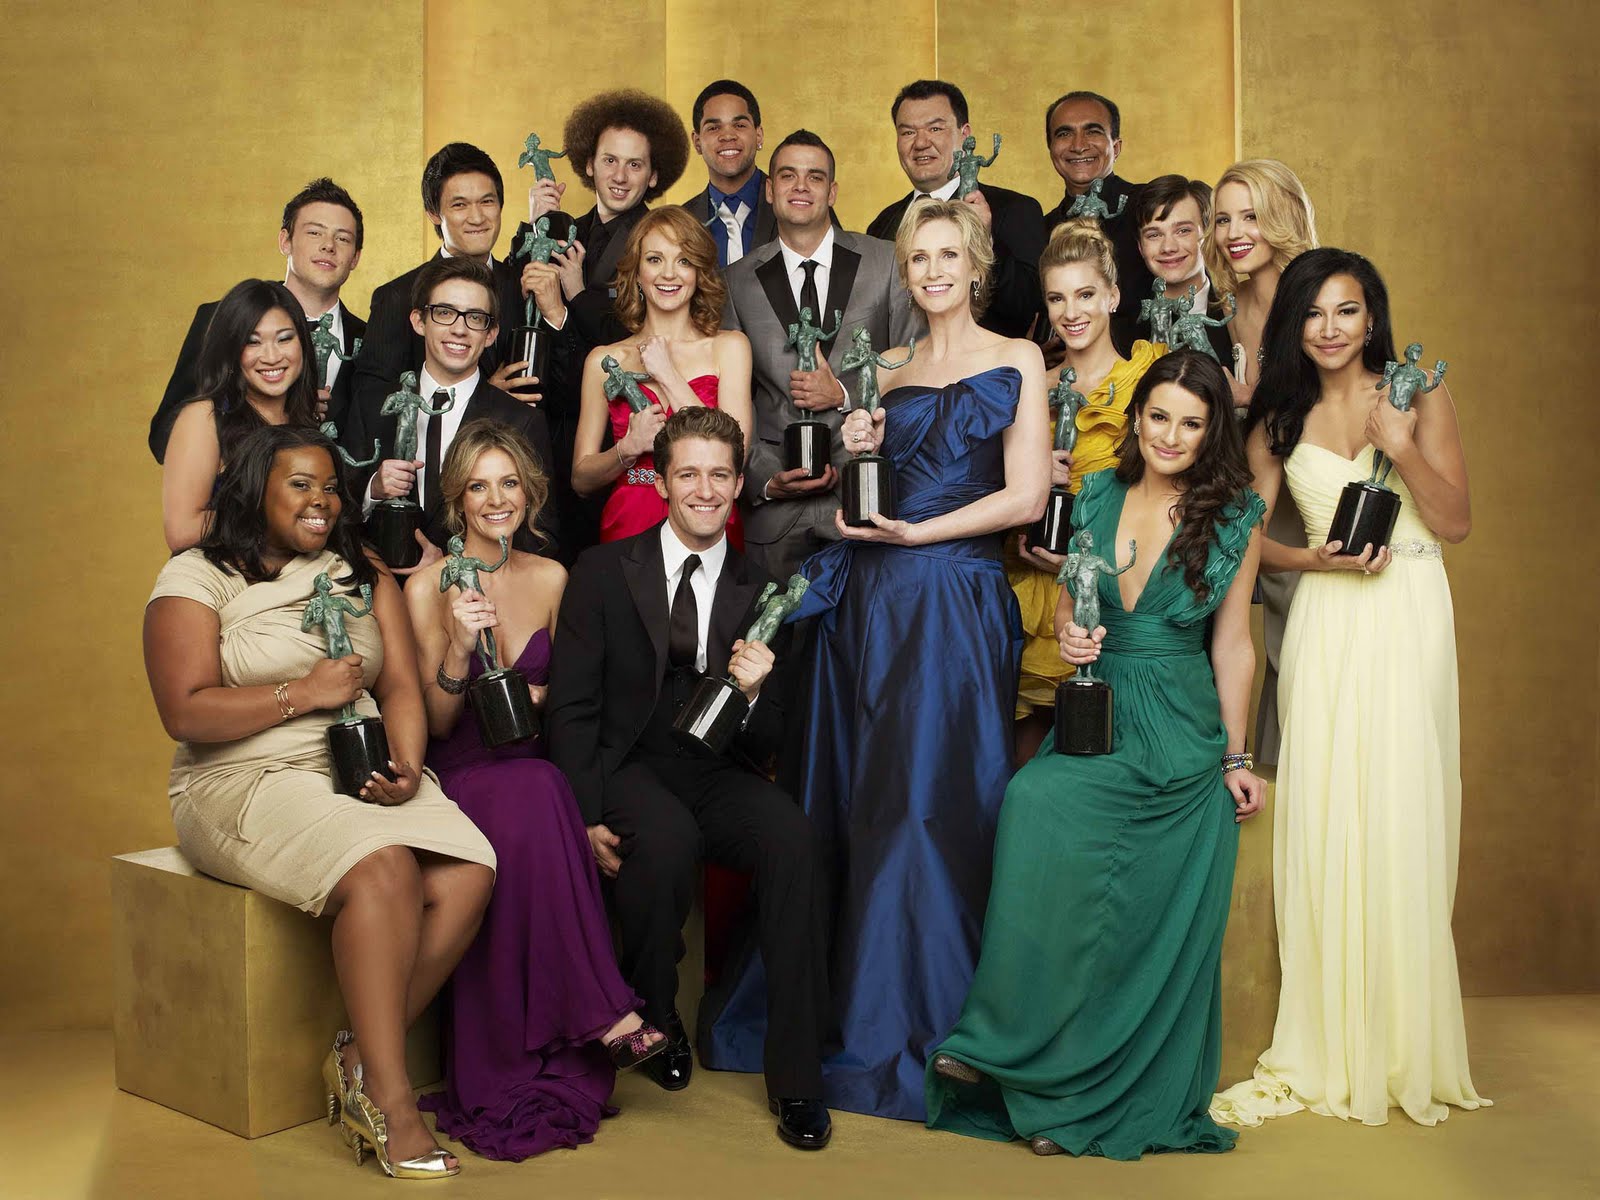 Glee Image Asdf HD Wallpaper And Background Photos